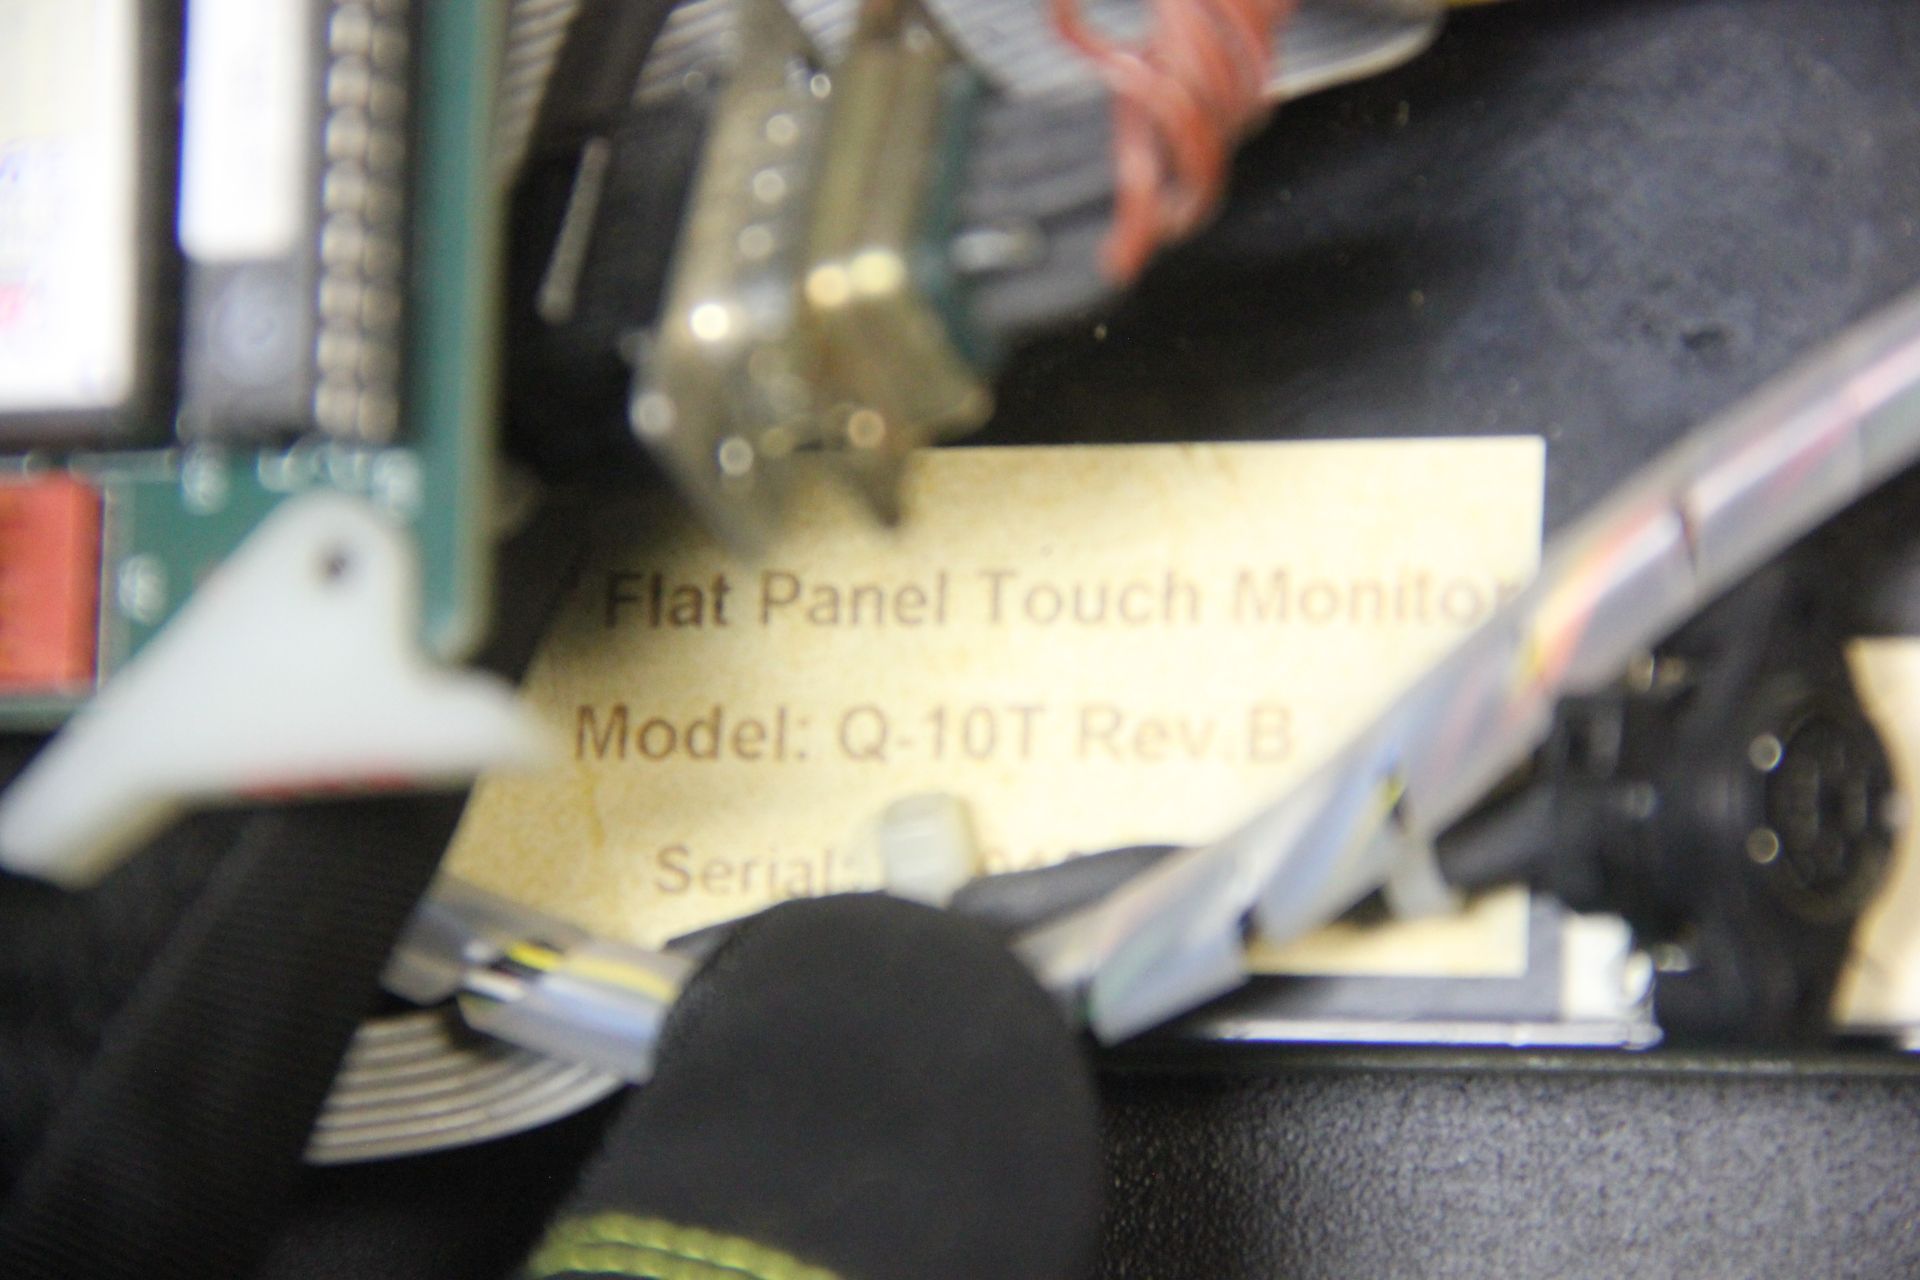 ELO FLAT PANEL TOUCH MONITOR - Image 3 of 3